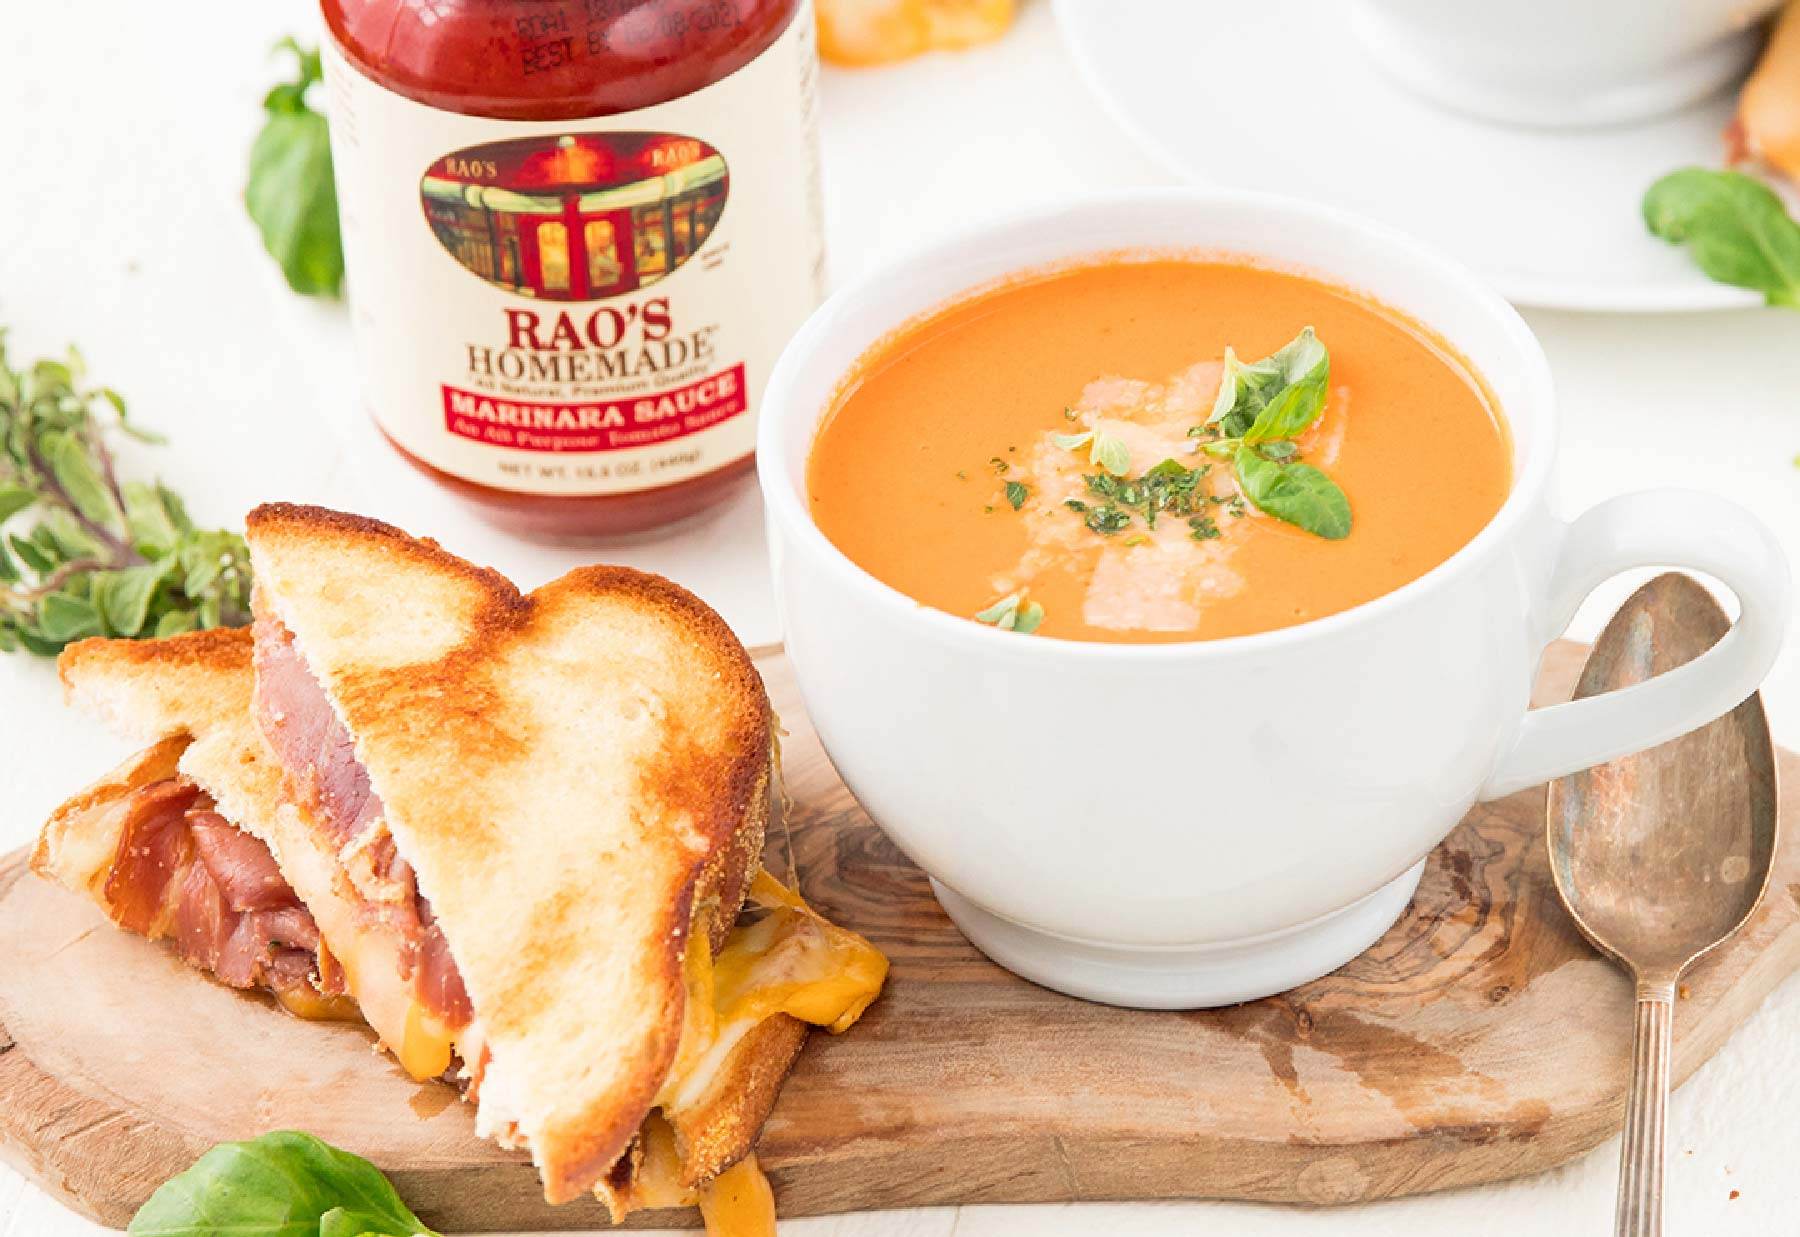 Grilled Cheese Sandwich With Tomato Soup ~ Best Comfort Food